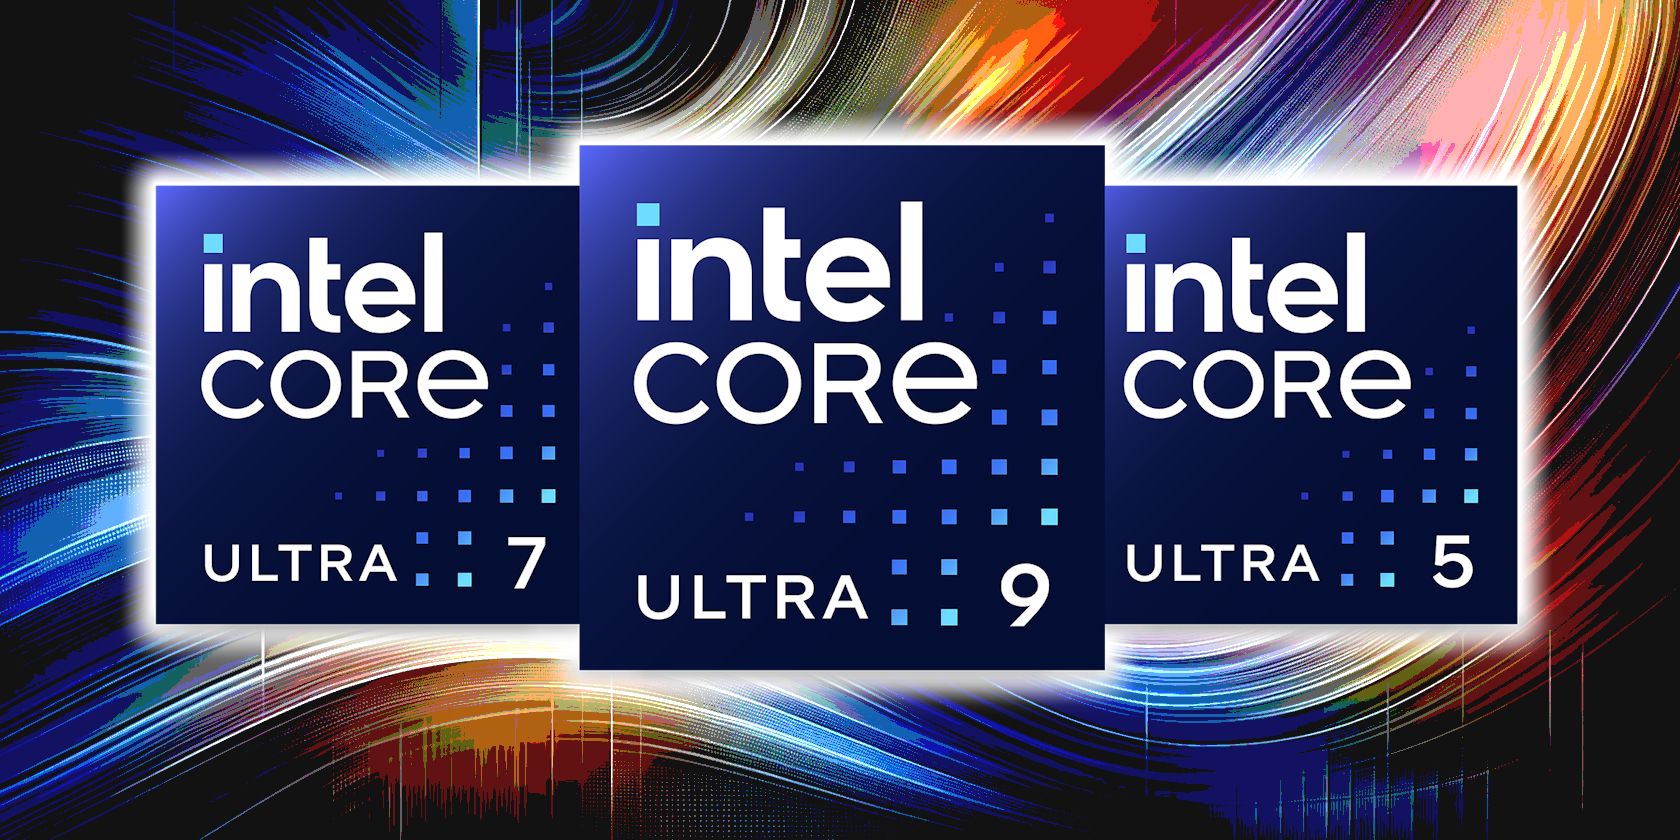 What Is Intel Core Ultra